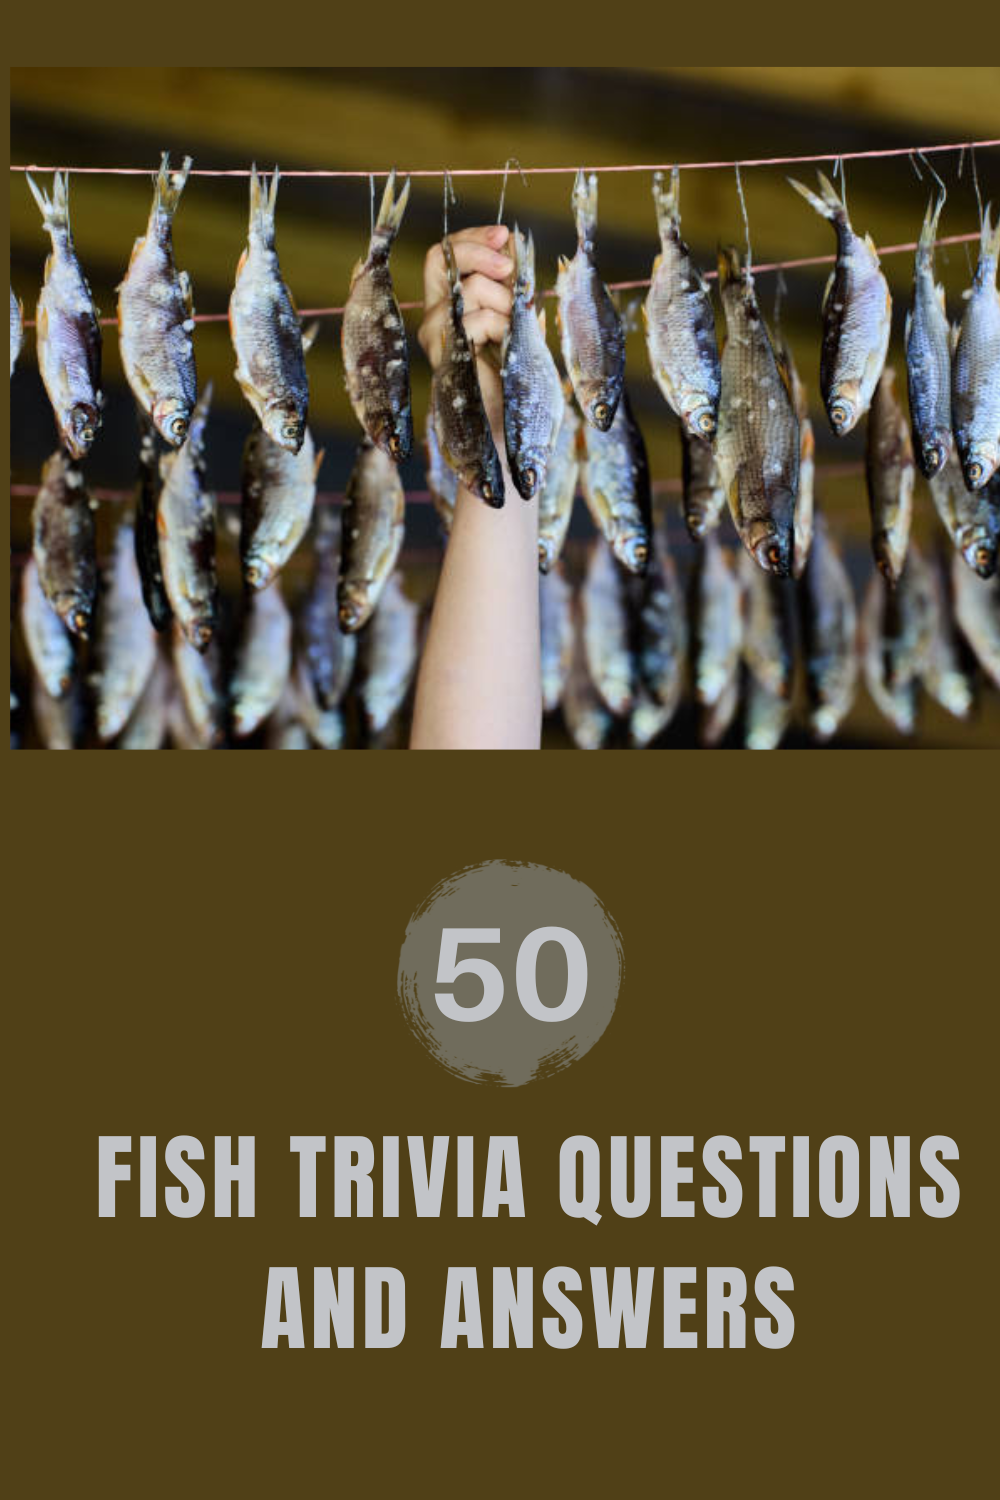 50 Fish Trivia Questions and Answers